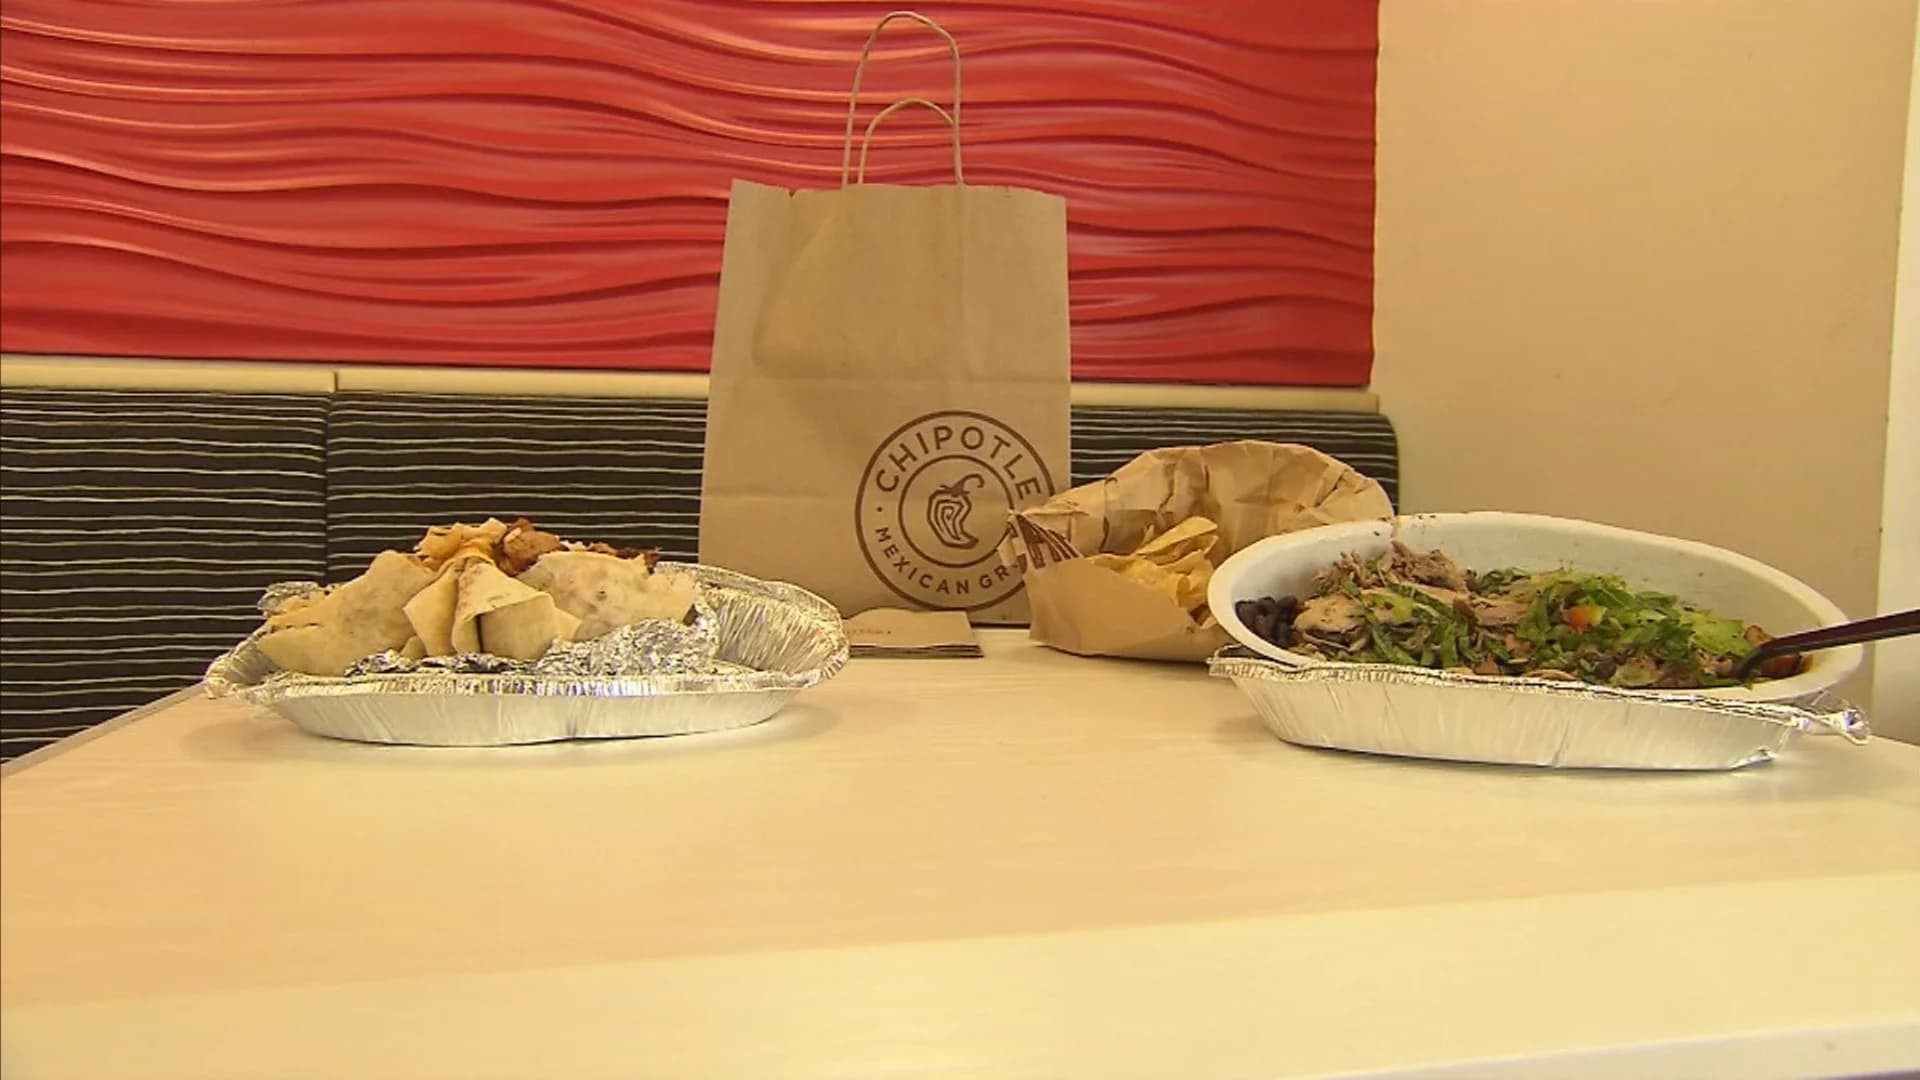 Study: Chipotle bowls exposed to chemicals that can lead to cancer